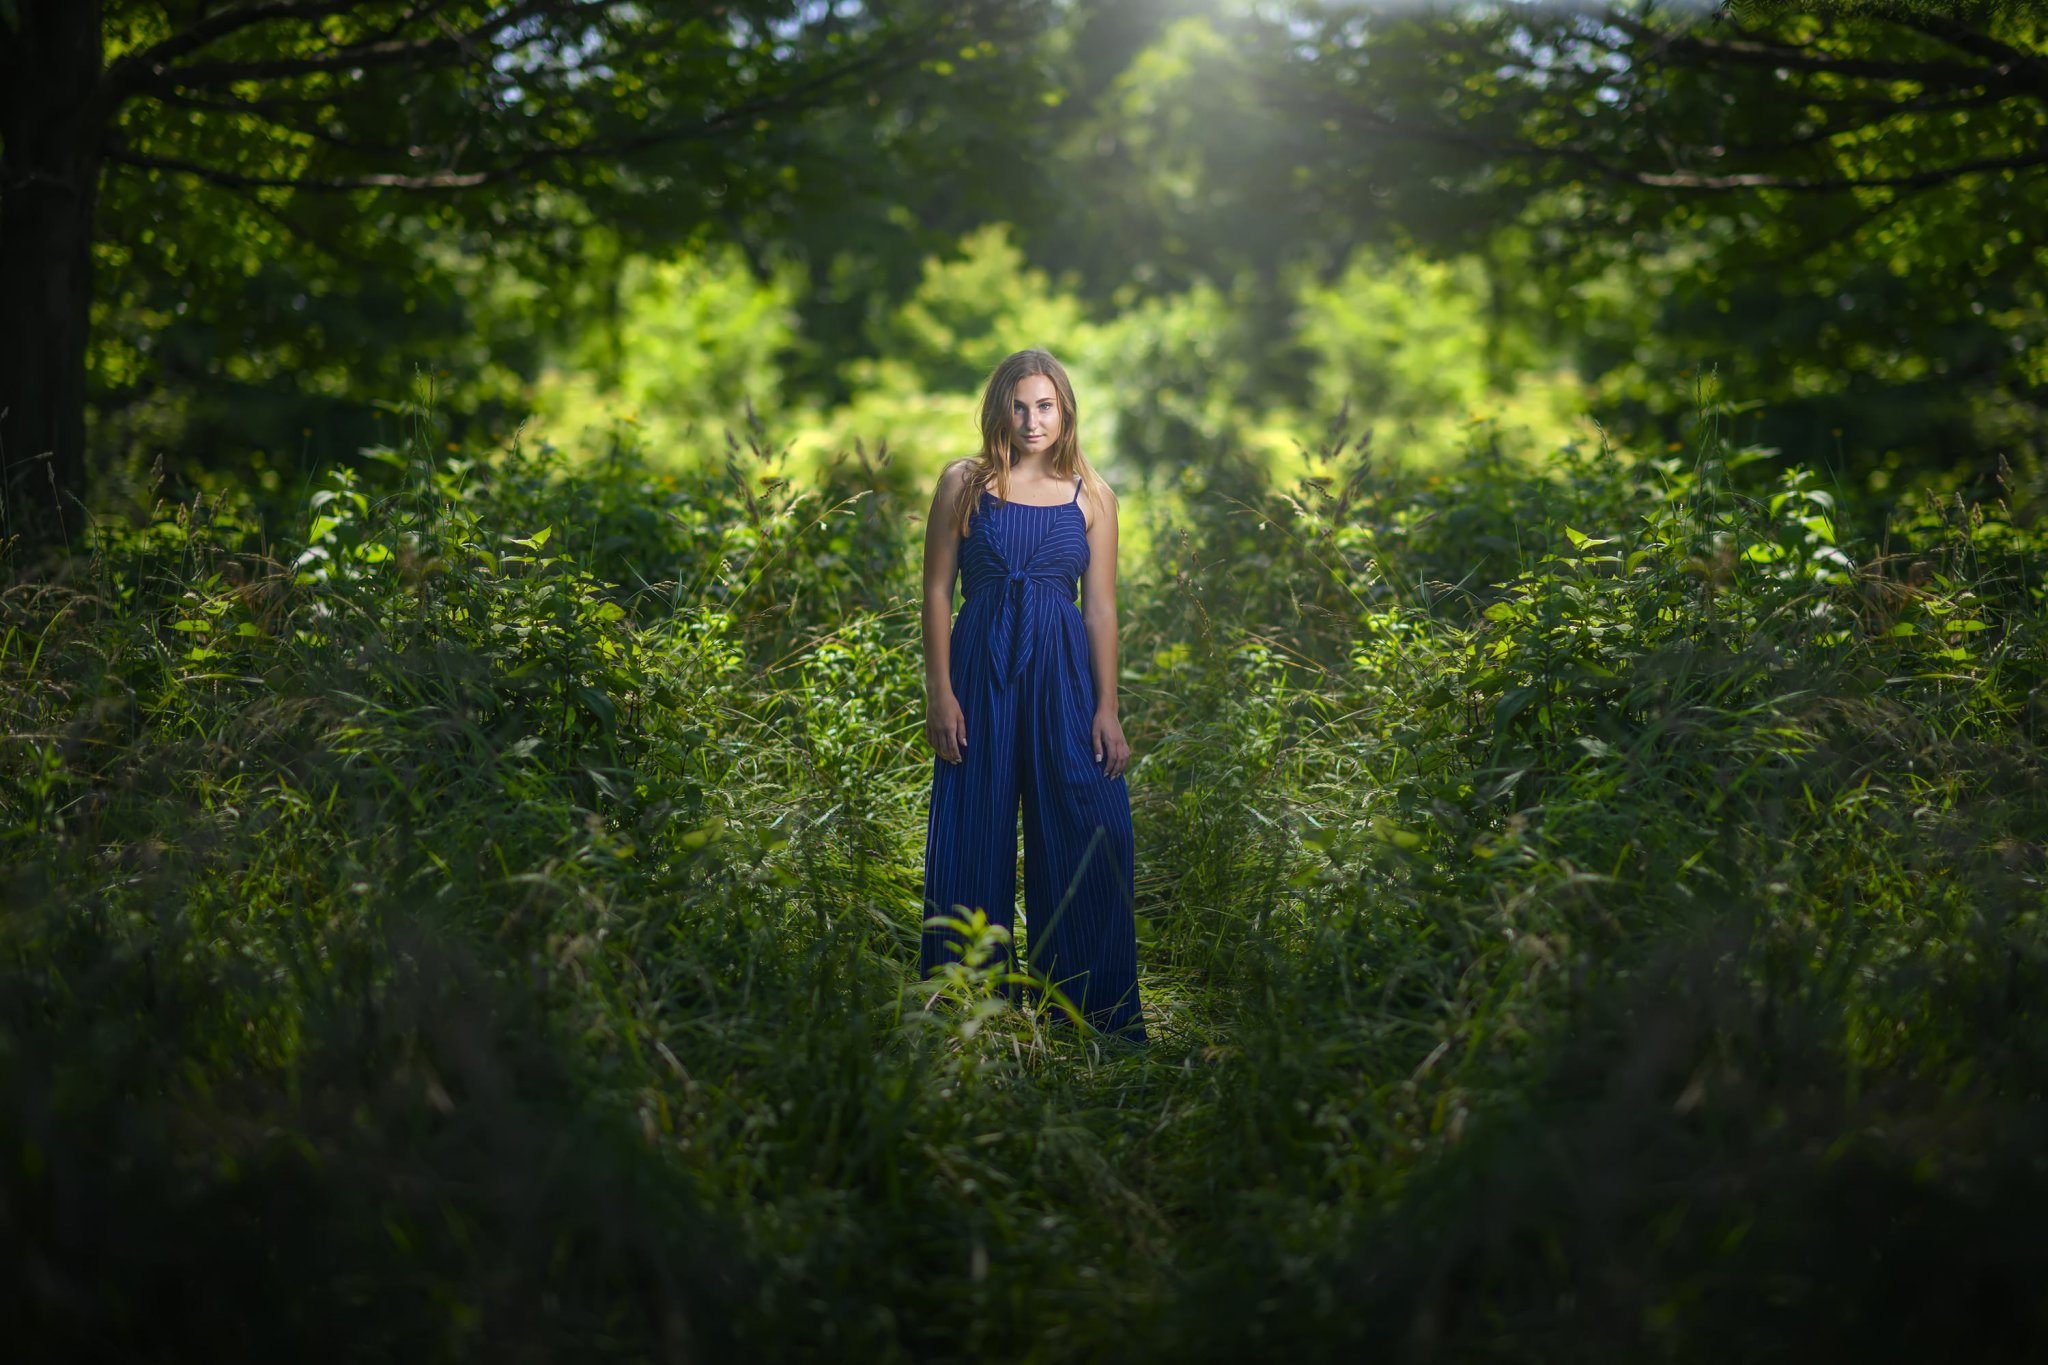 How Audrey Woulard Captured the Girl In The Woods in Urban Chicago